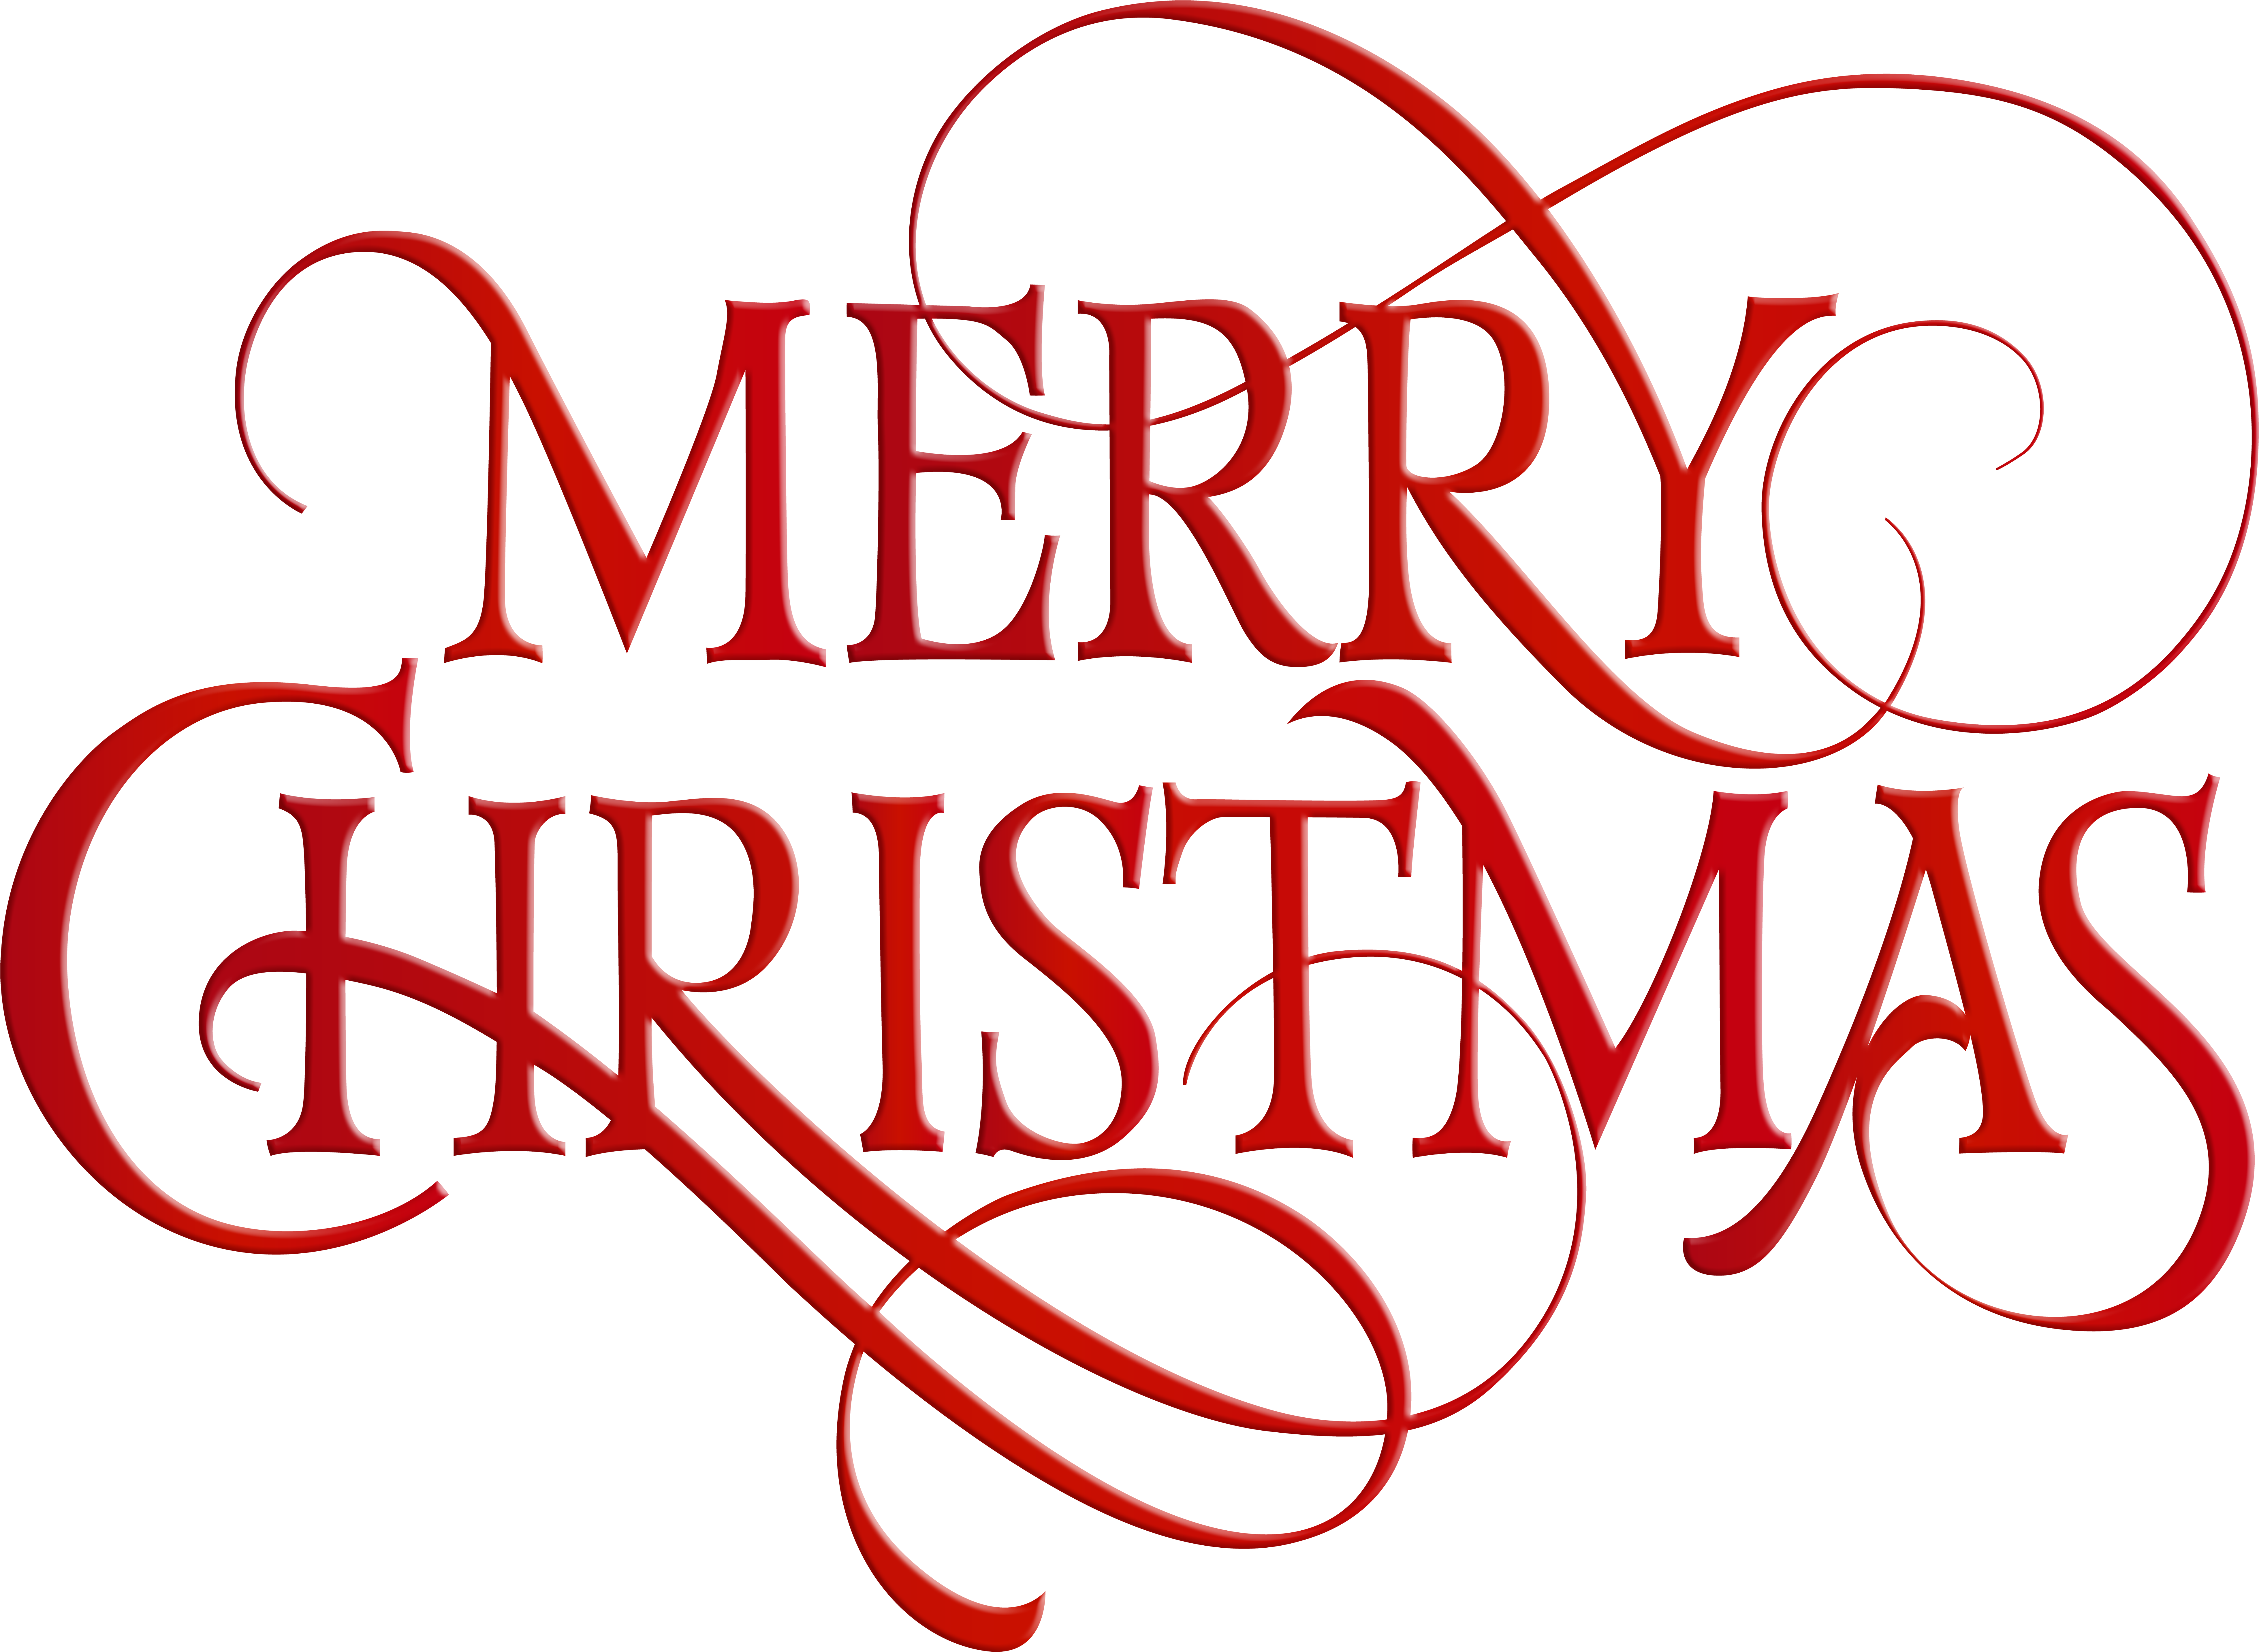 Merry Christmas Celebration PNG HD Quality